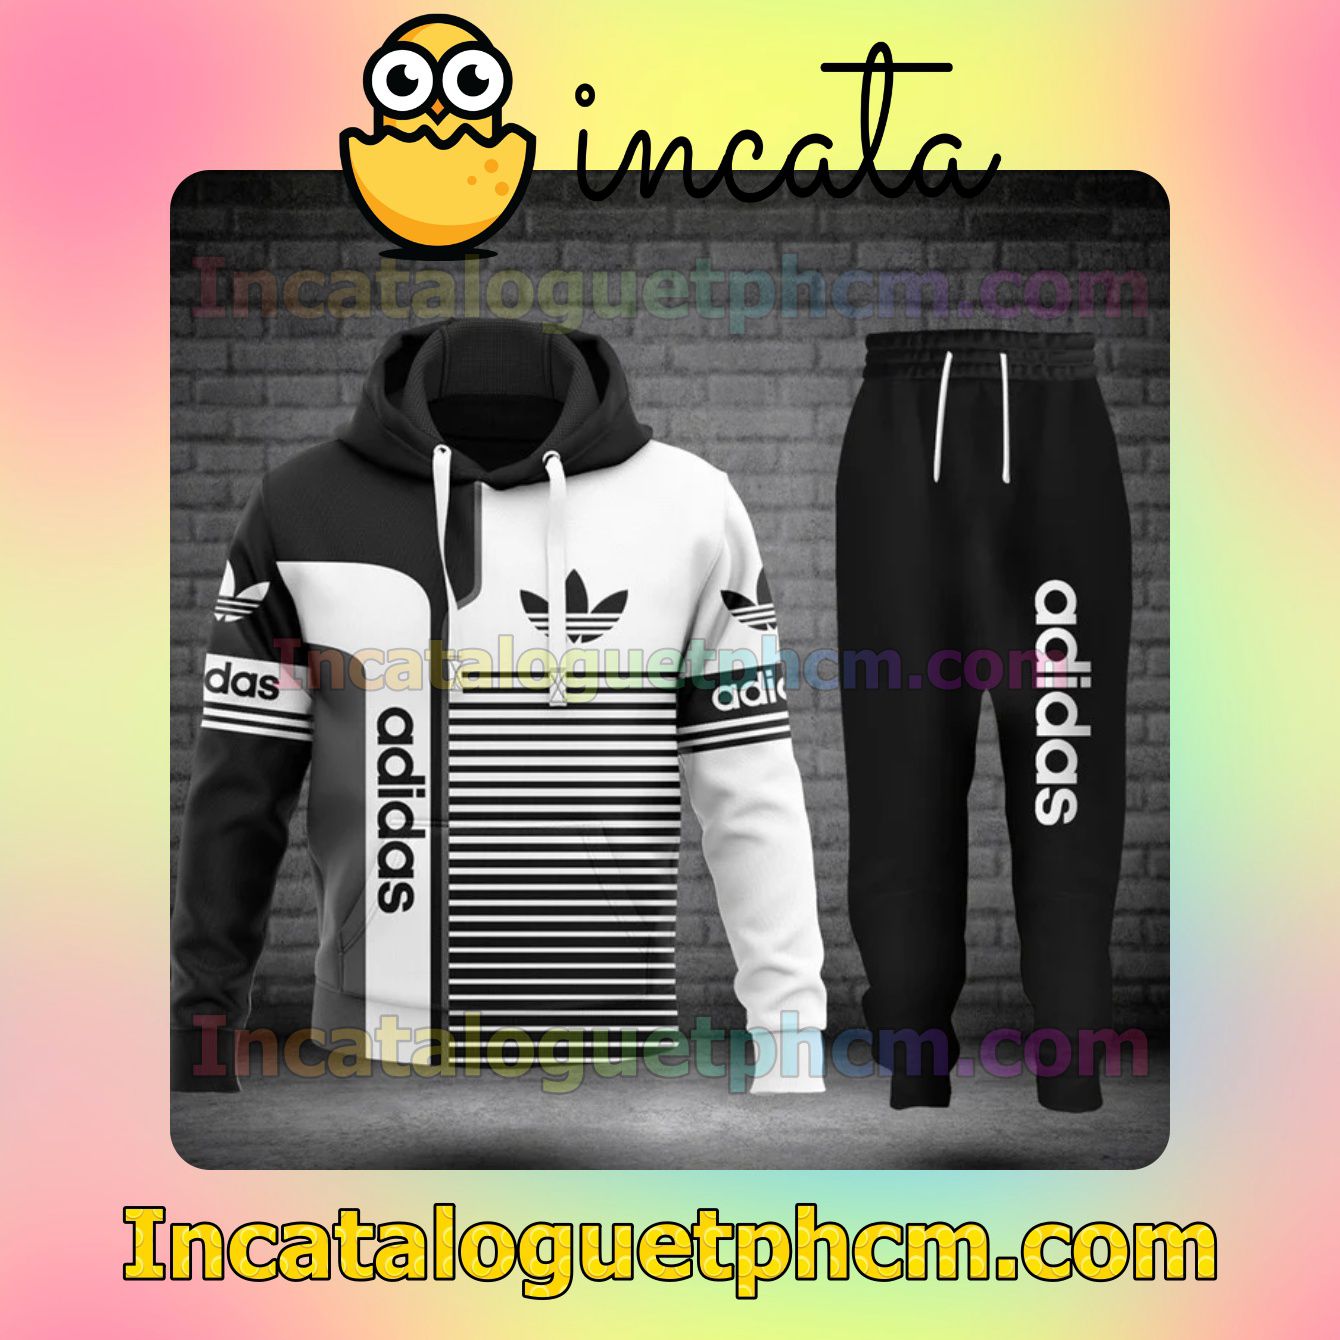 Adidas Stripes Mix White And Black Zipper Hooded Sweatshirt And Pants